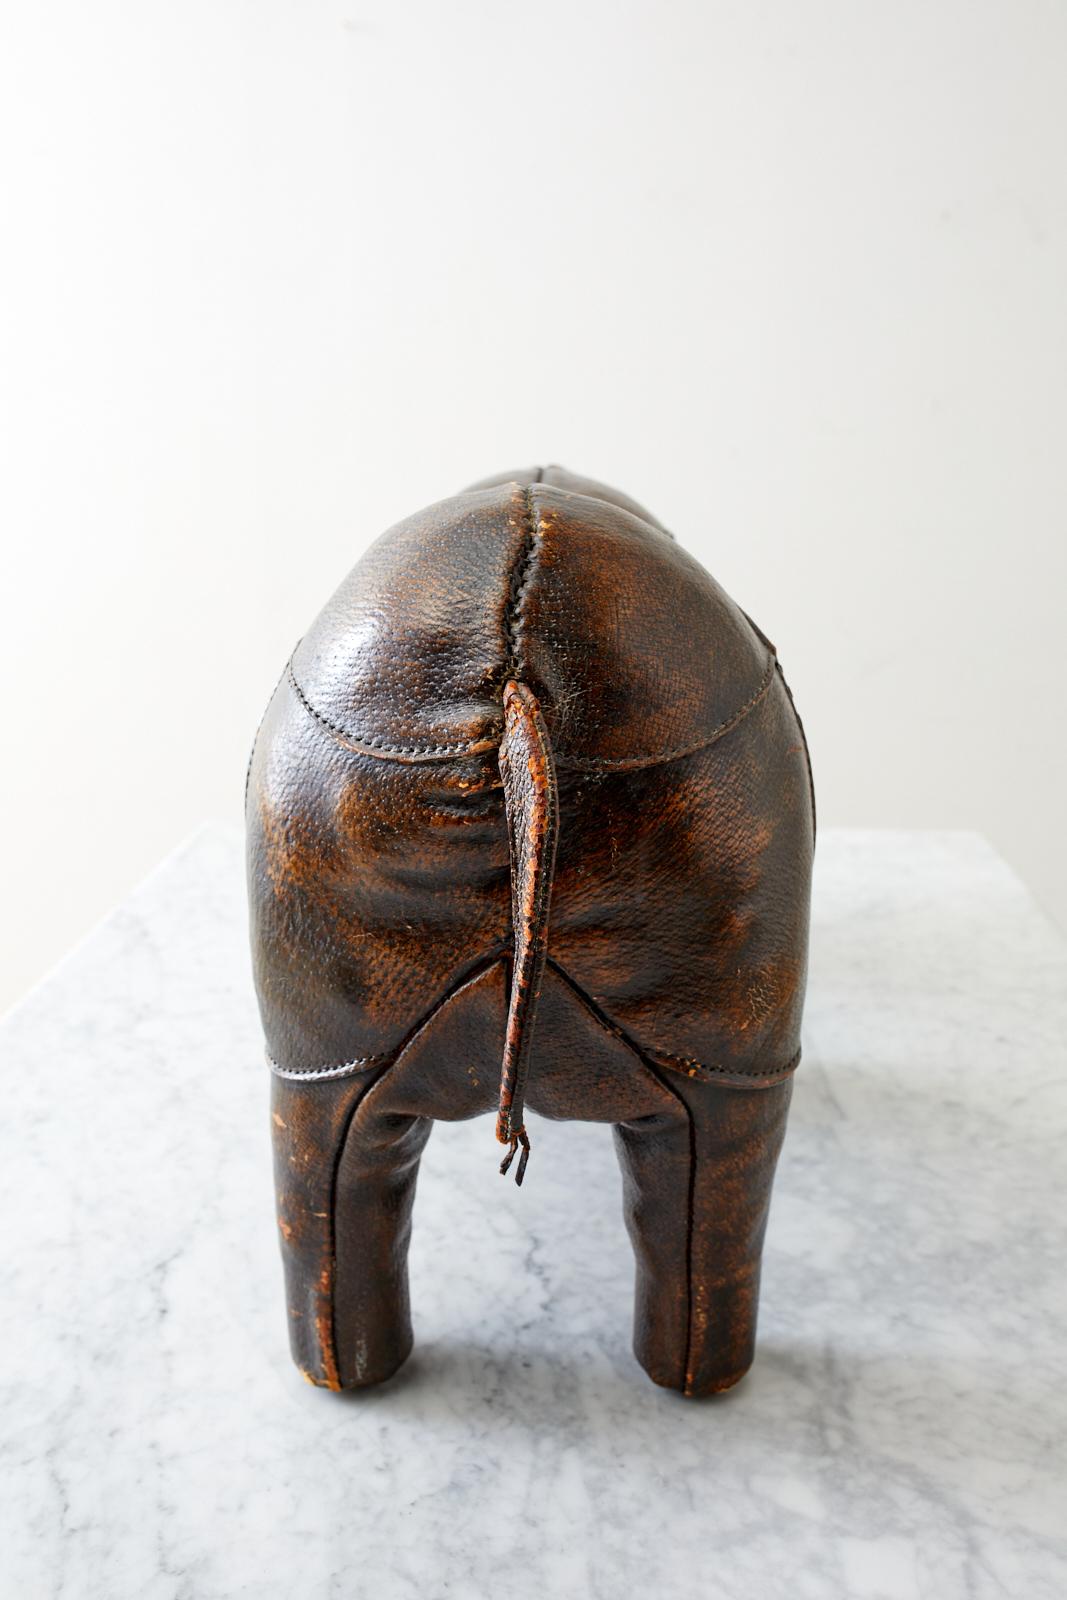 Dimitri Omersa for Abercrombie Leather Rhino Footstool In Distressed Condition In Rio Vista, CA